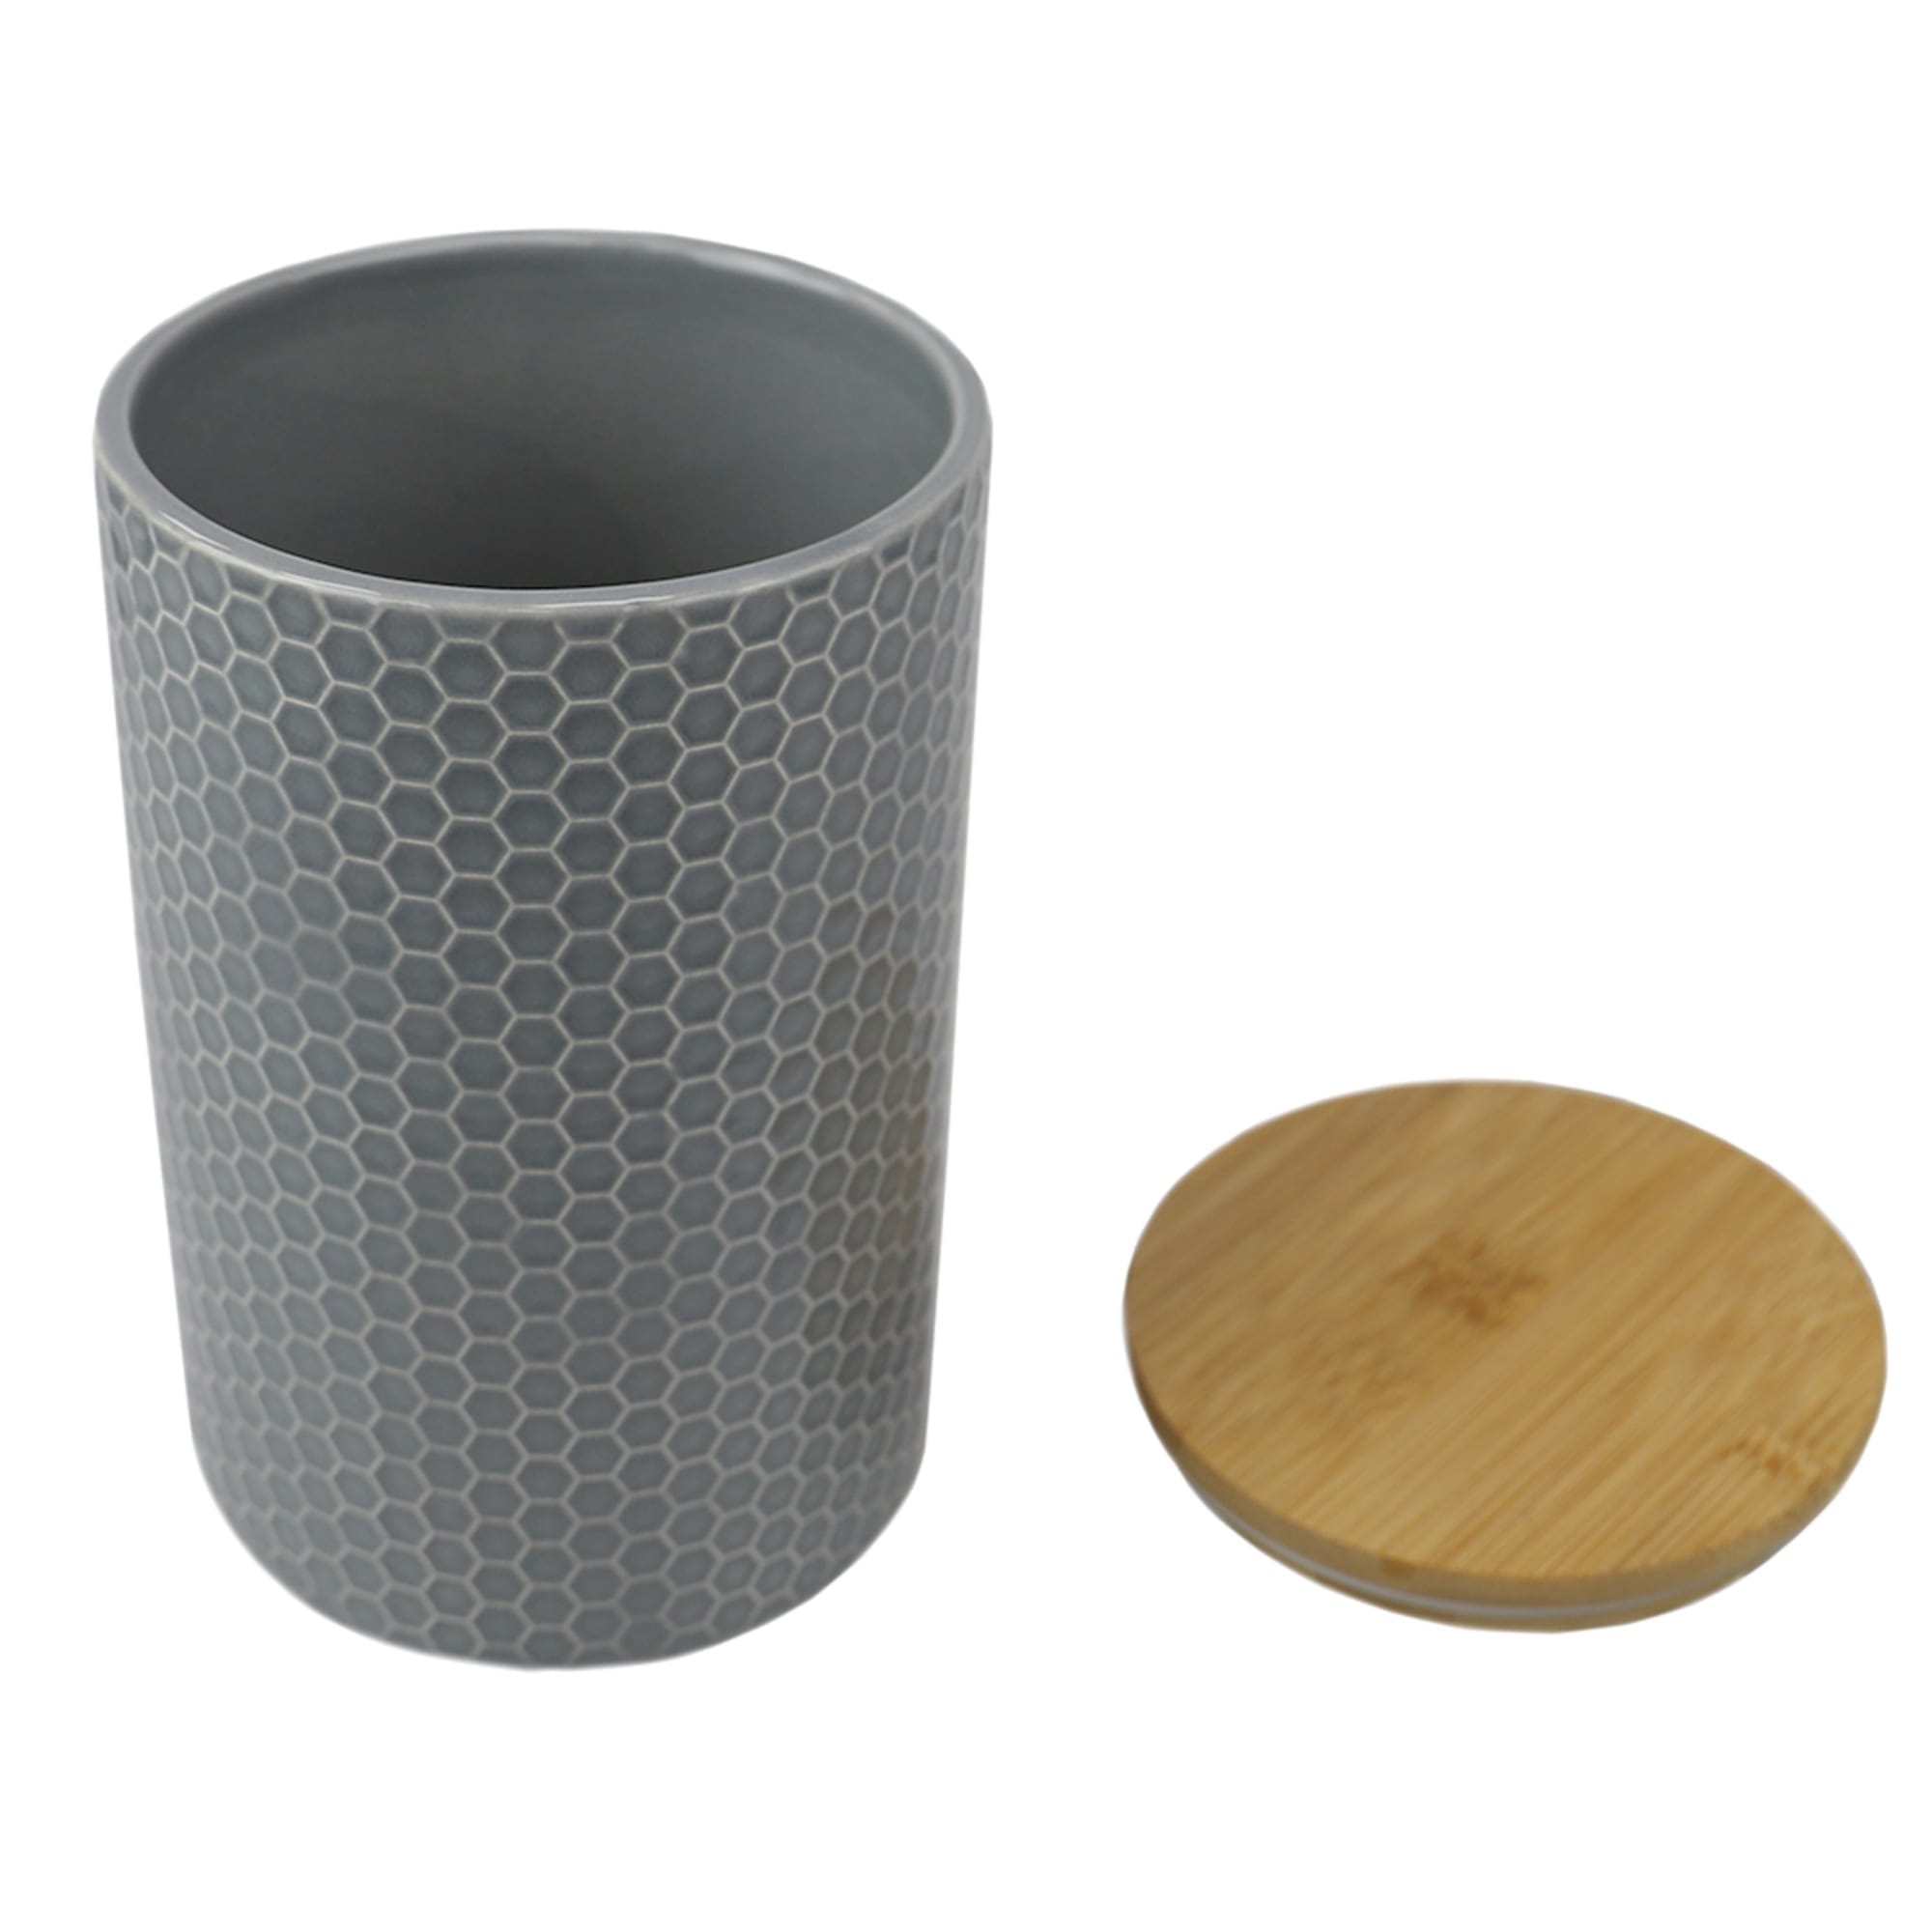 Home Basics Honeycomb Large Ceramic Canister, Grey $7.00 EACH, CASE PACK OF 12